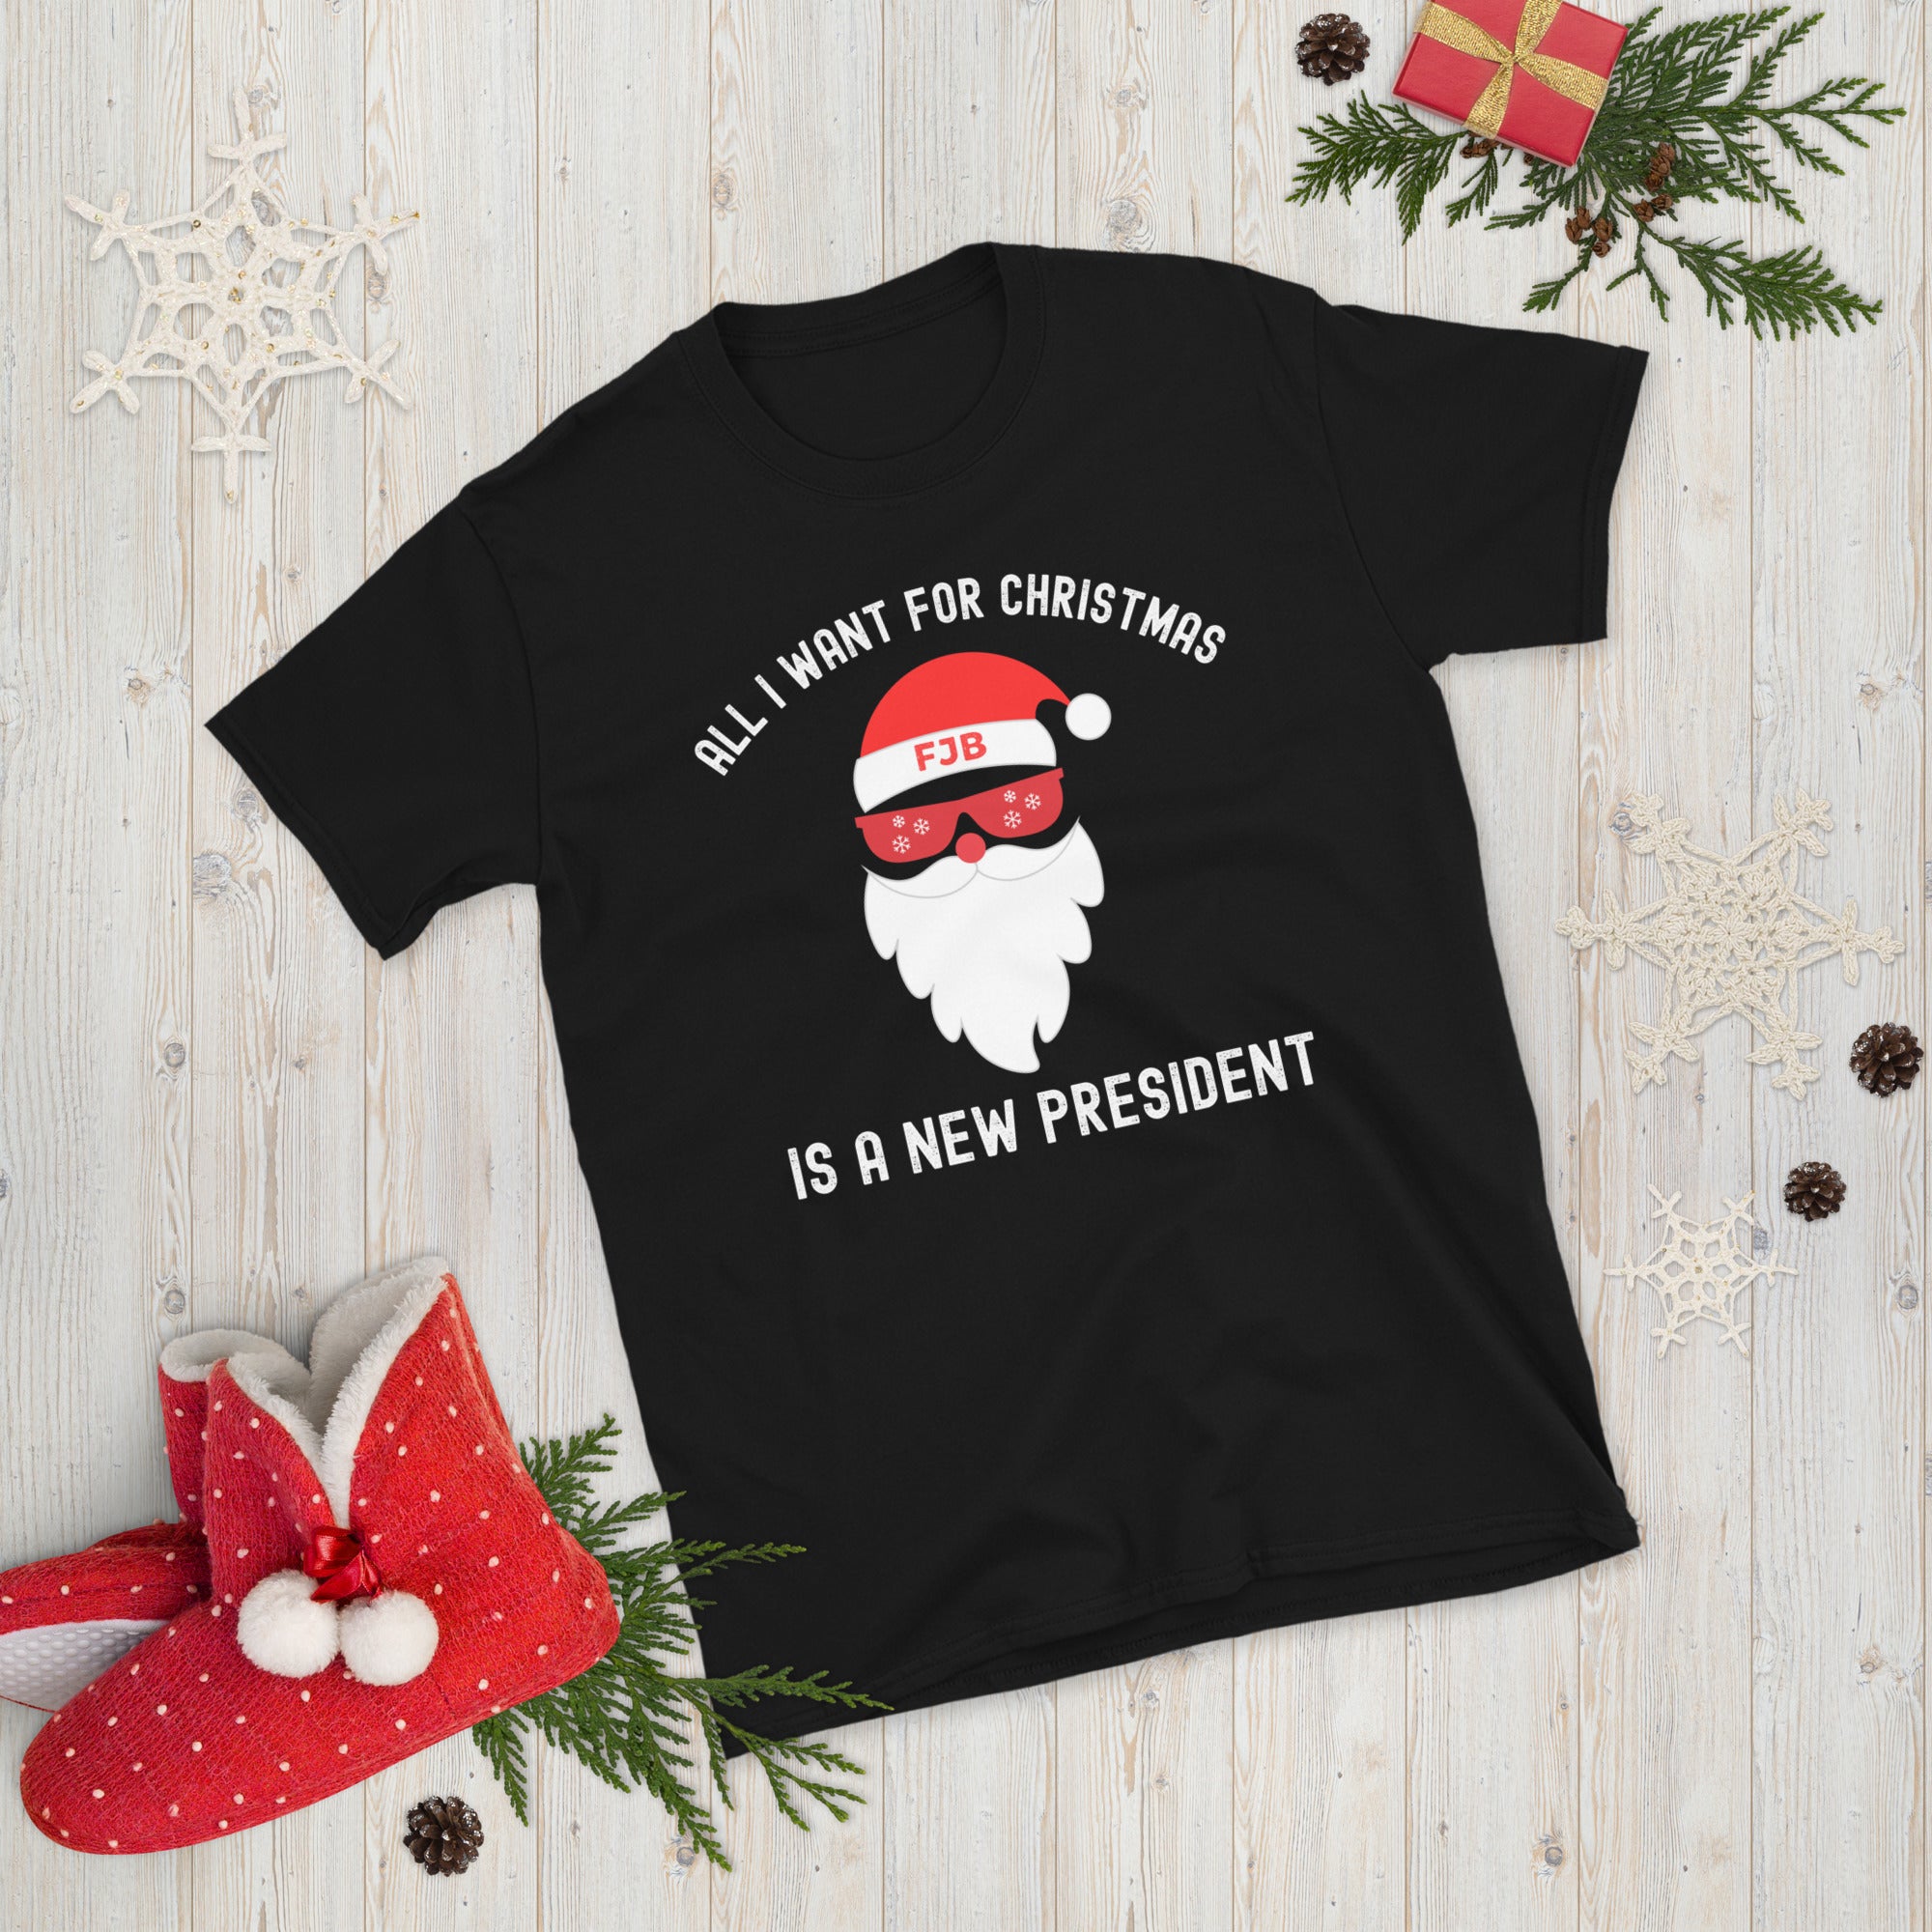 All I Want For Christmas Is A New President, Republican Christmas Shirt, Xmas Conservative ΤShirt, Impeach Biden Tee, FJB Shirt, FJB Gifts - Madeinsea©